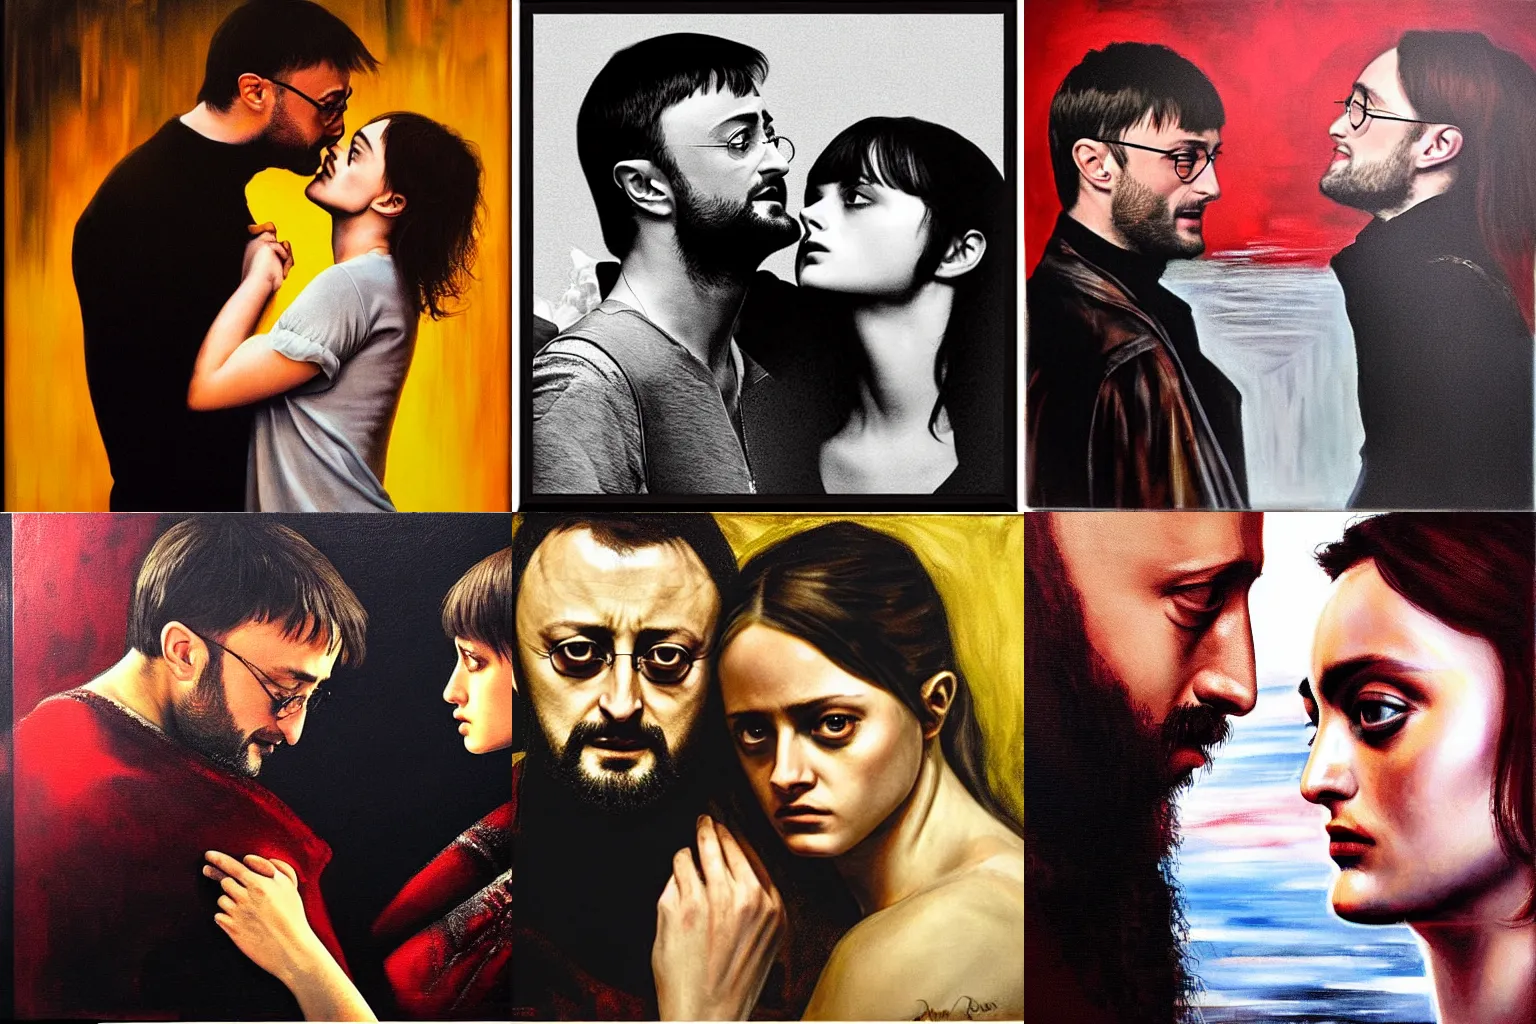 Prompt: Romeo (Jean Reno) and Juliet (daniel radcliffe), are looking at each other romantically. dramatic, high contrast, romantic, theatrical, lumnious, cinematic lights, oil canvas by Csók István, Munkácsi and Hollósy Simon